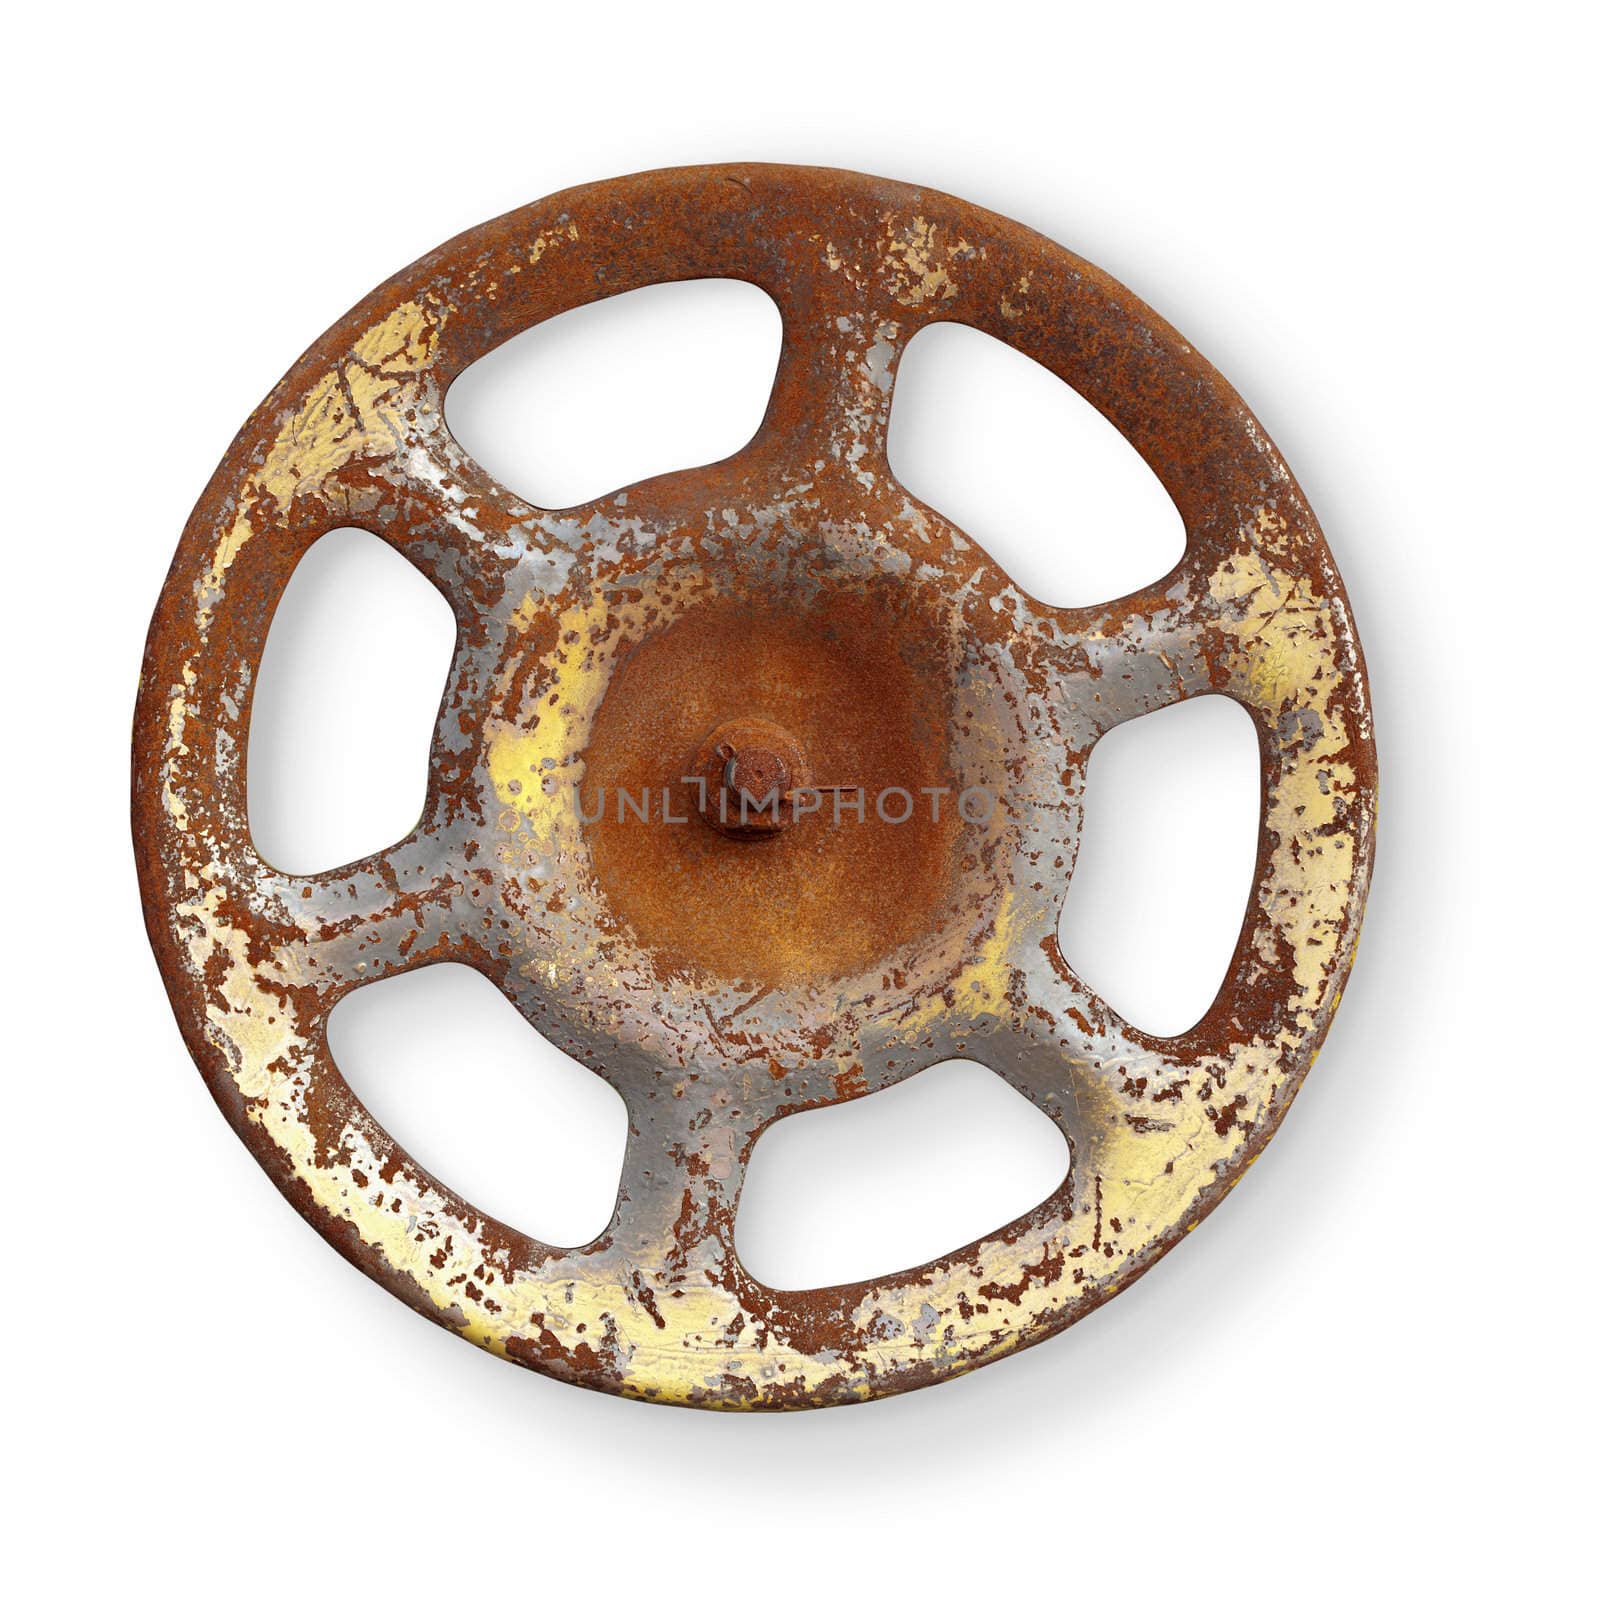 Old rusty metal valve on white background by pzaxe